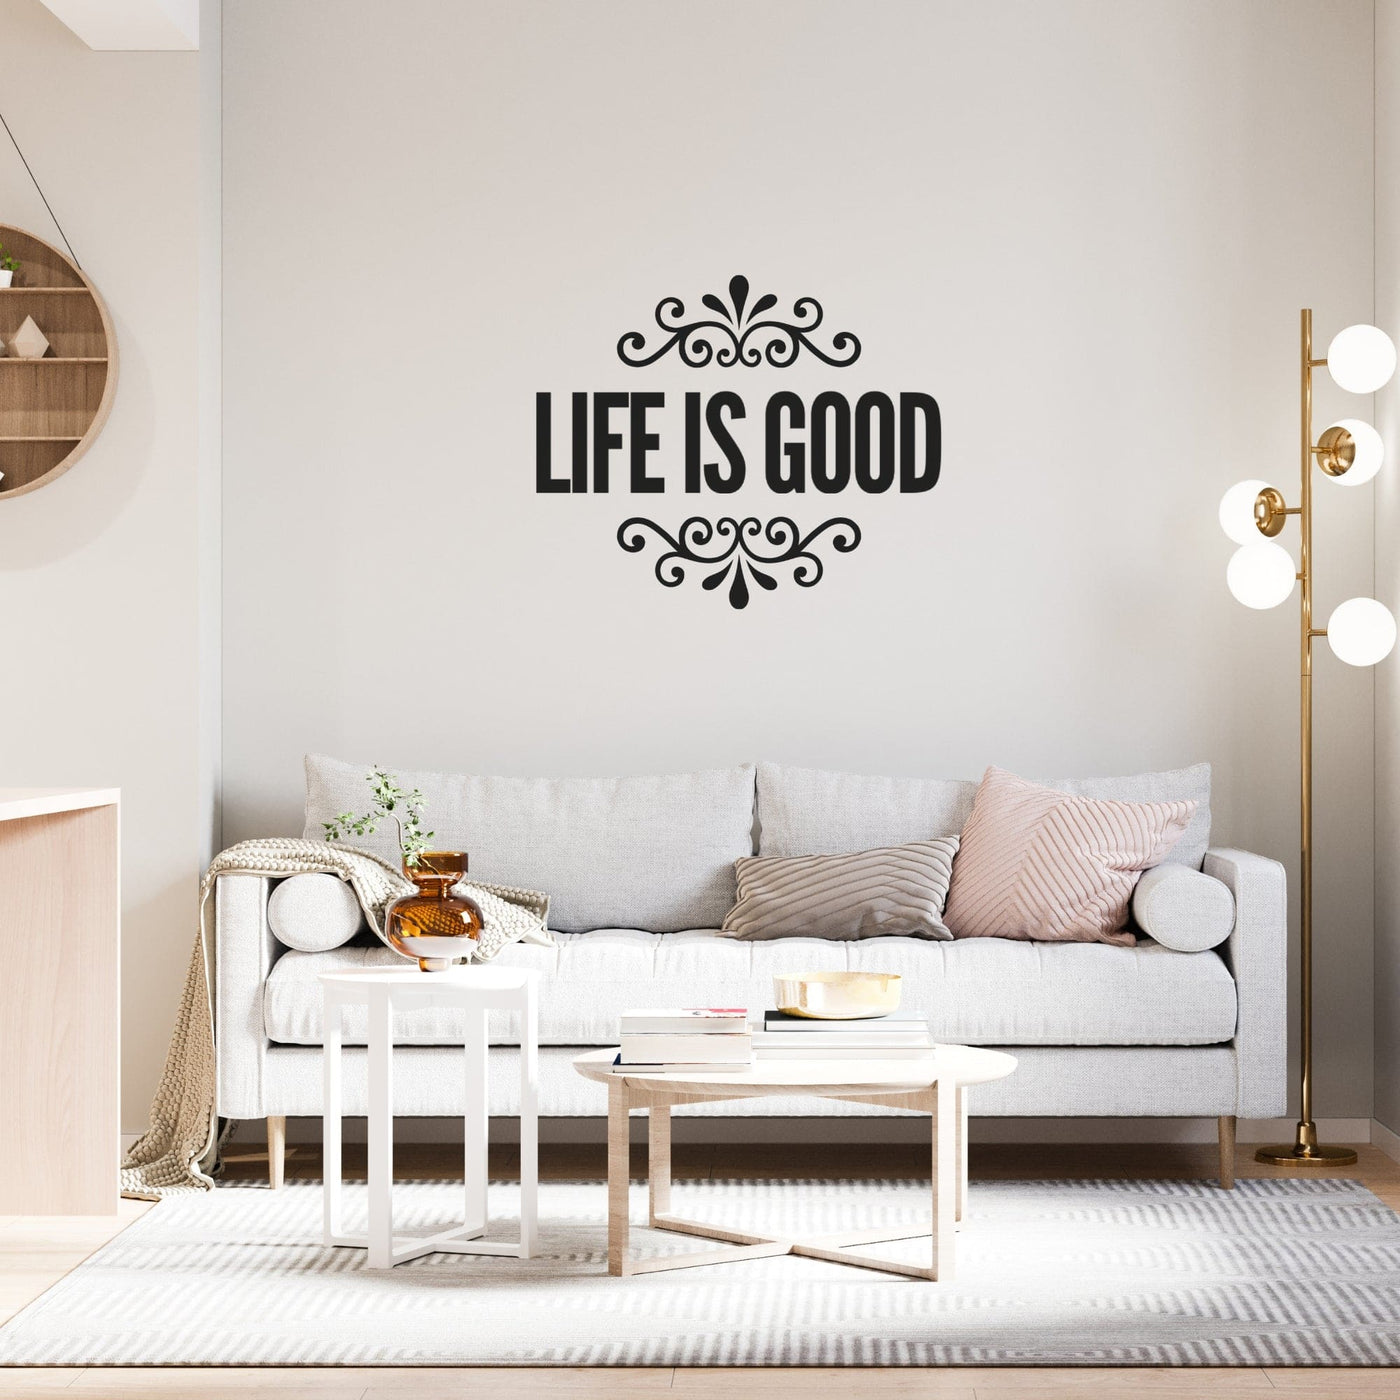 Decor - Life Is Good Removable Vinyl Wall Decal Easy Peel And Stick Wall Art -